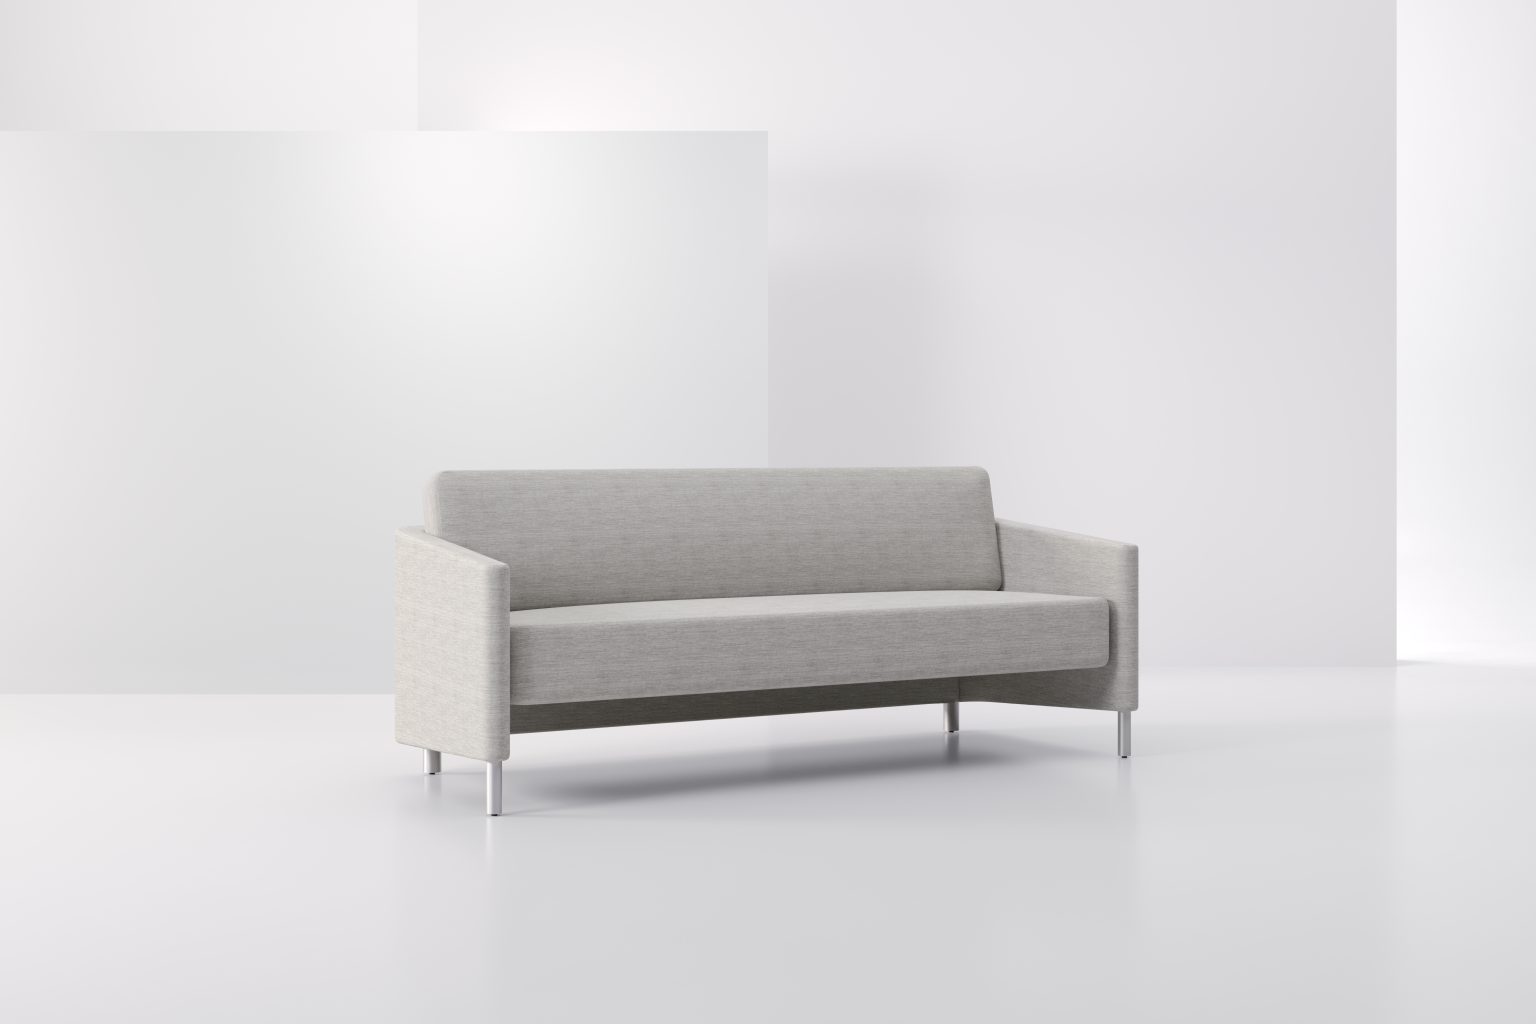 Rochester Sofa Product Image 1